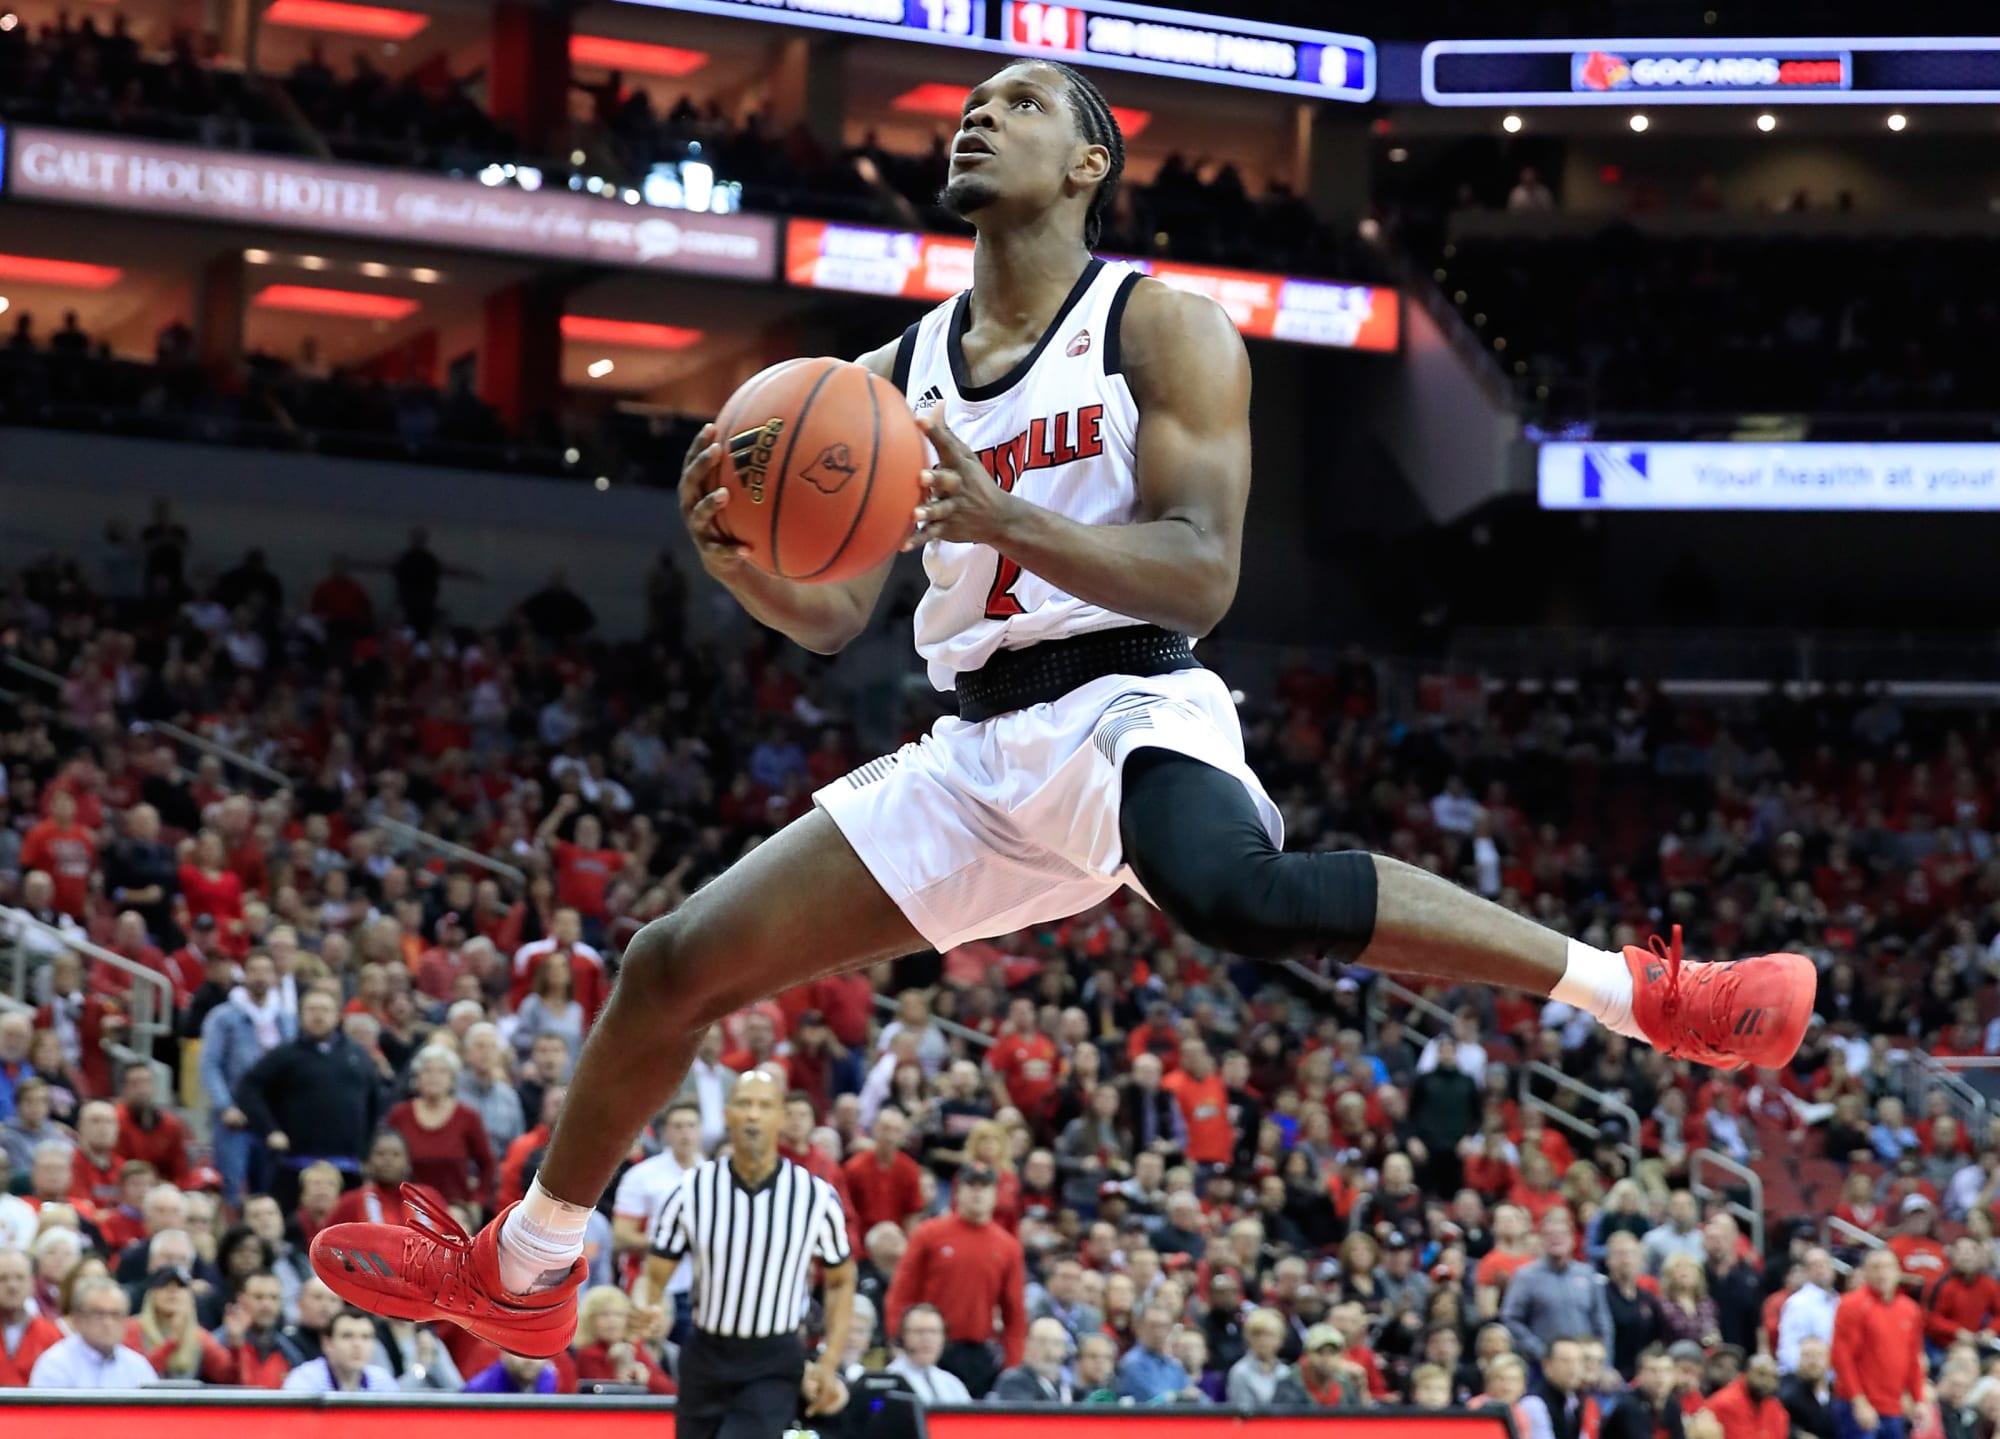 Three reasons why Louisville basketball could be final four bound in 2020